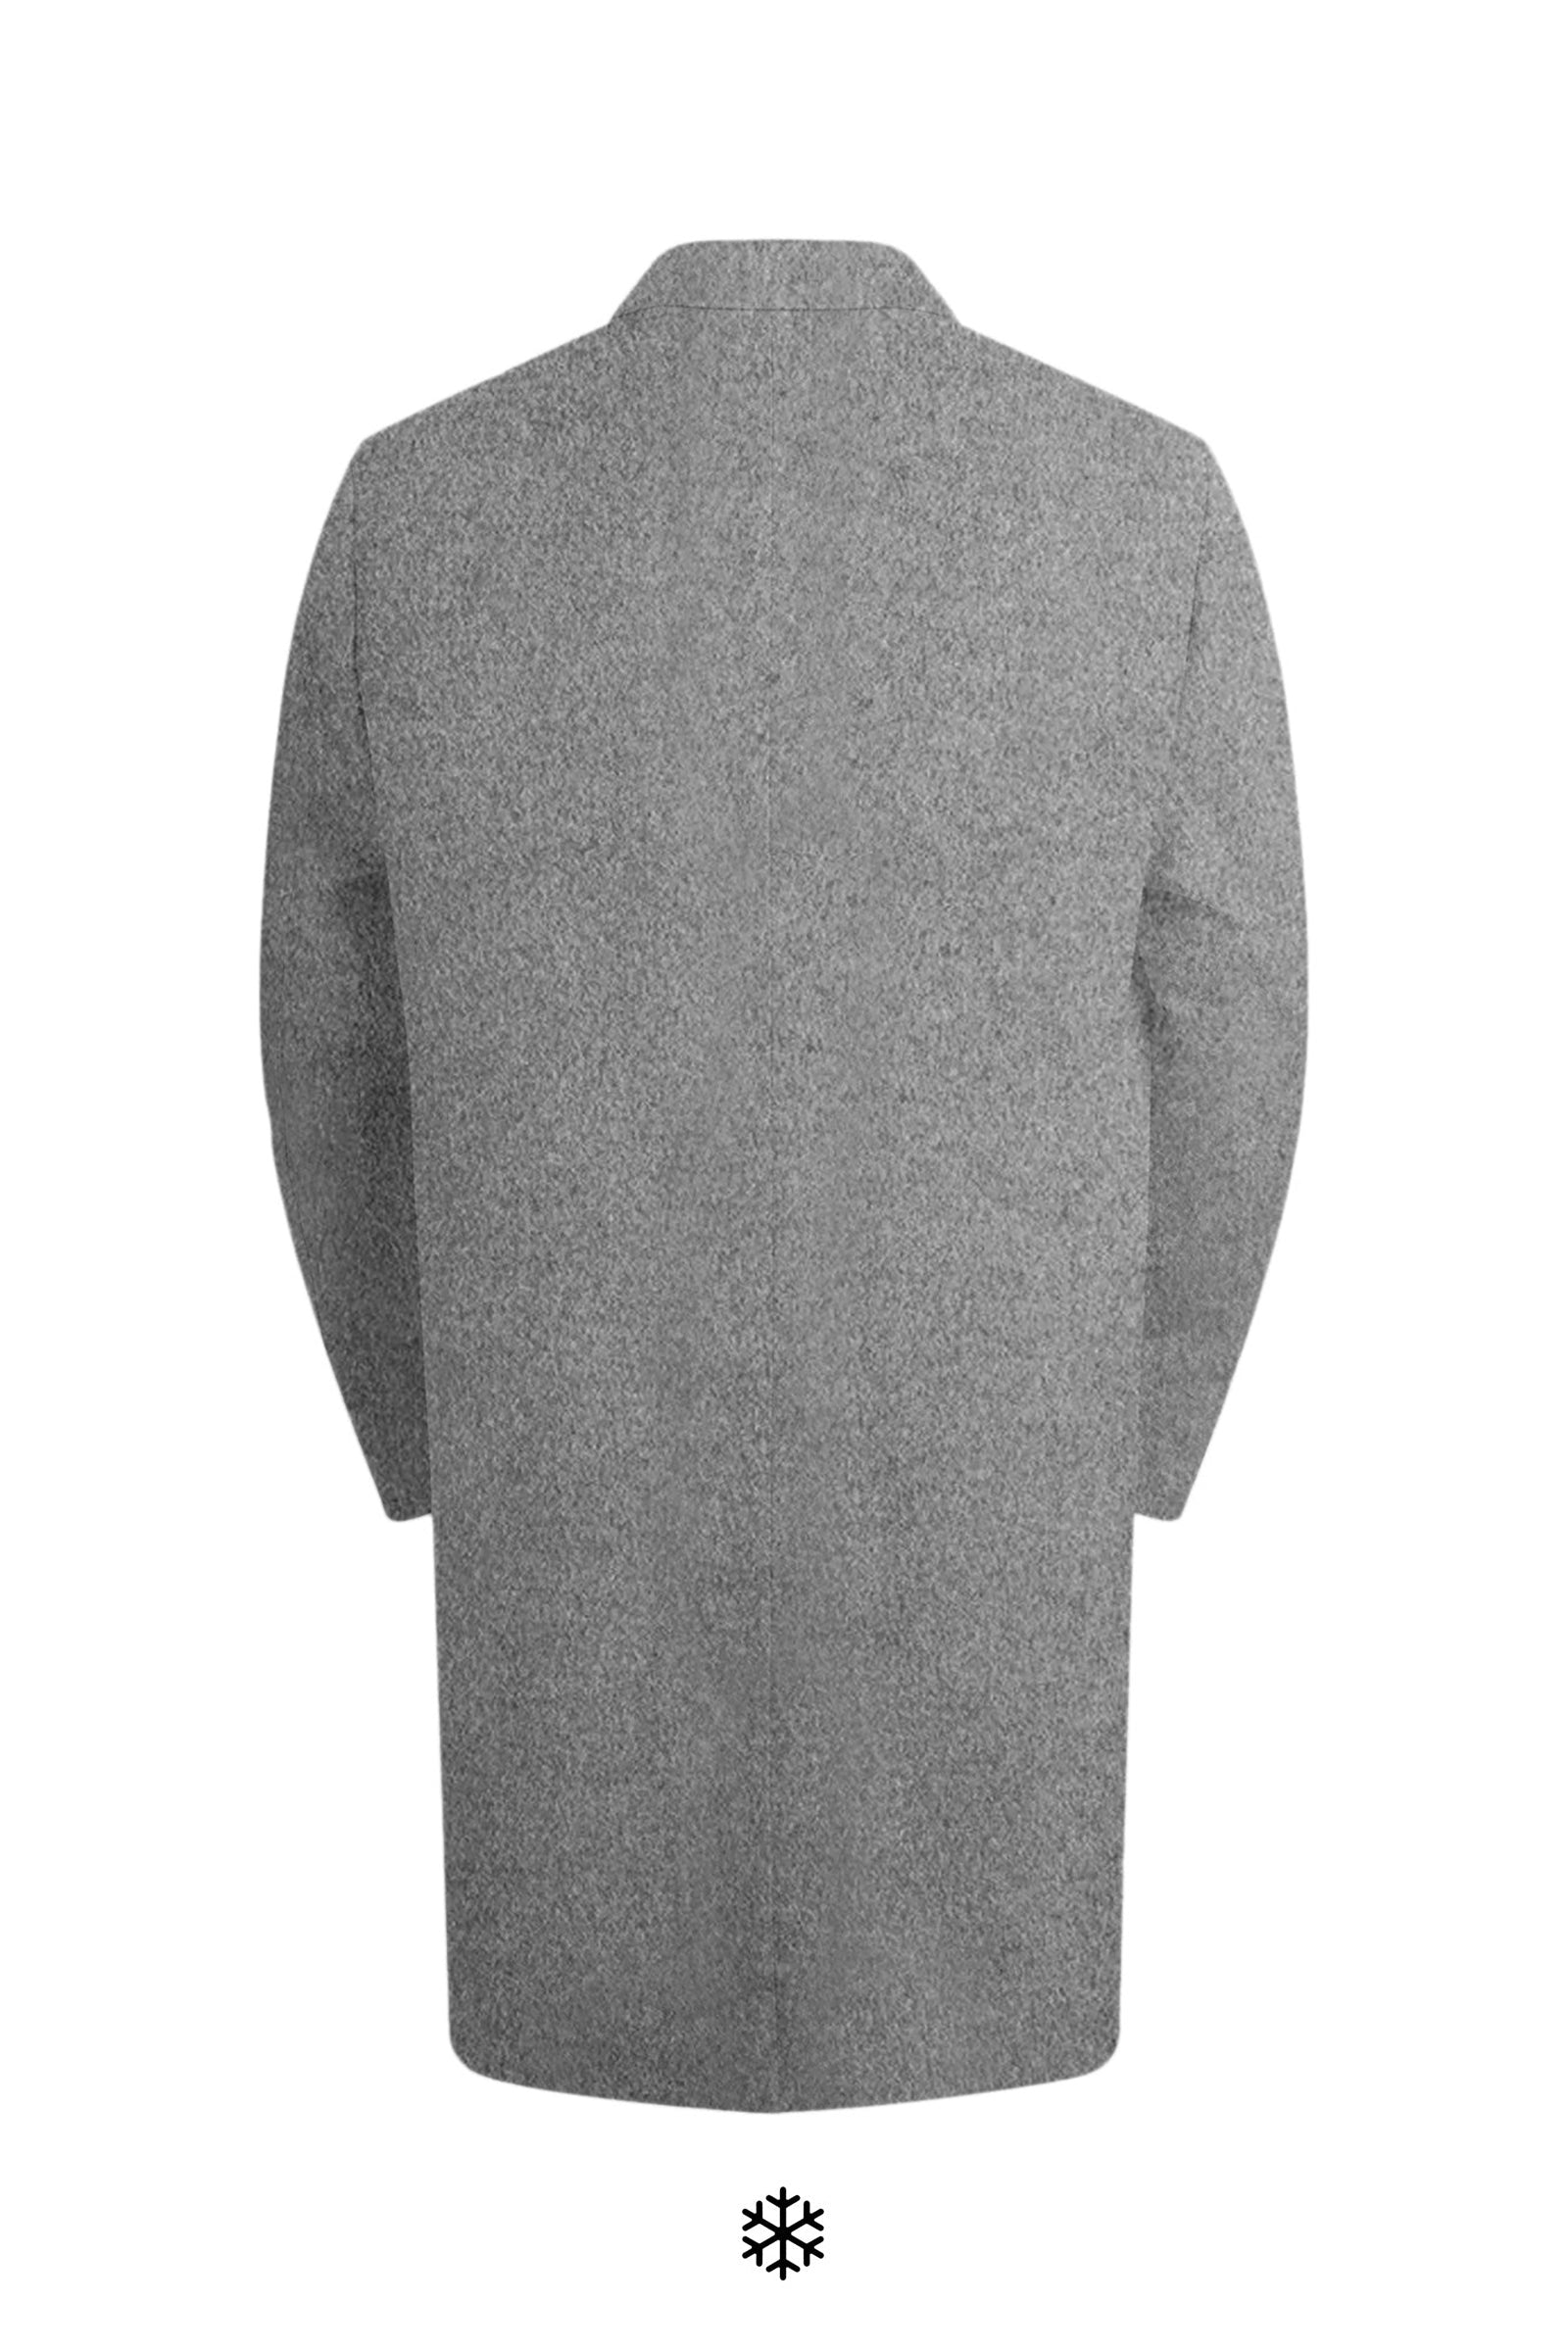 Thomas - grey wool and cashmere topcoat 41.5 inch length